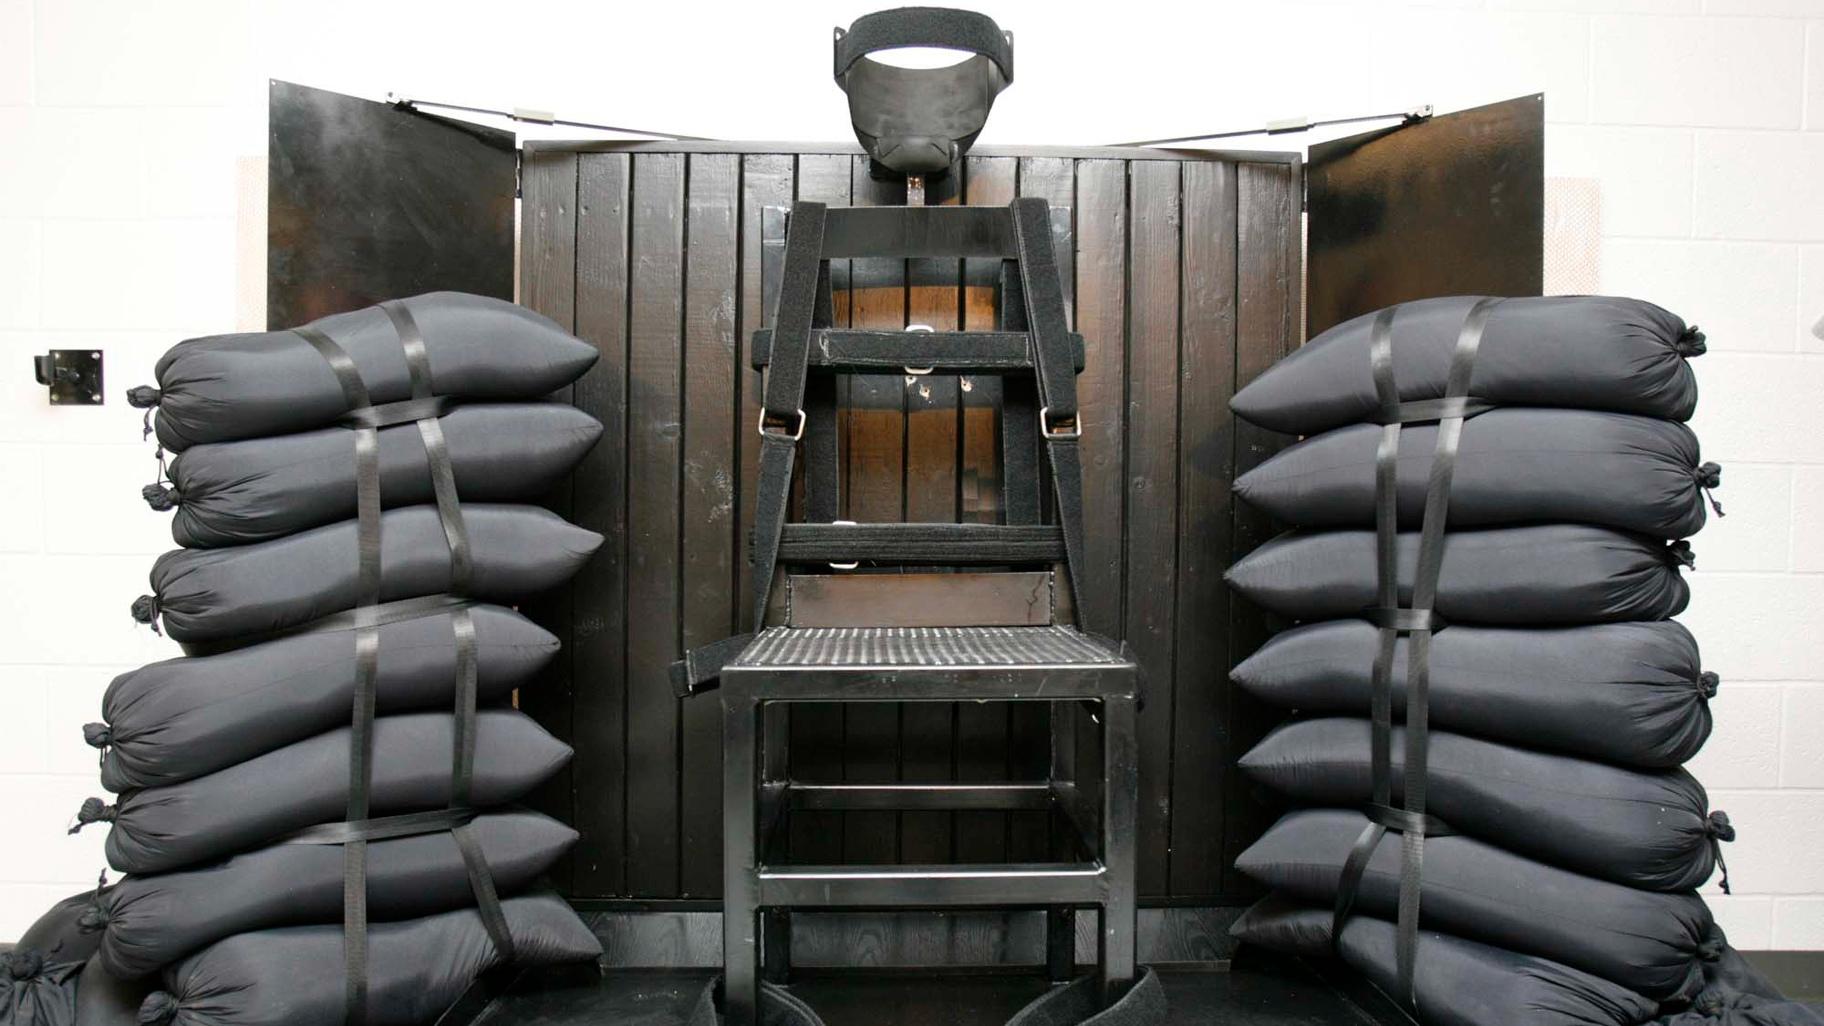 A chair sits in the execution chamber at the Utah State Prison on June 18, 2010, after Ronnie Lee Gardner was executed by firing squad in Draper, Utah. (Trent Nelson / The Salt Lake Tribune via AP, Pool, File)